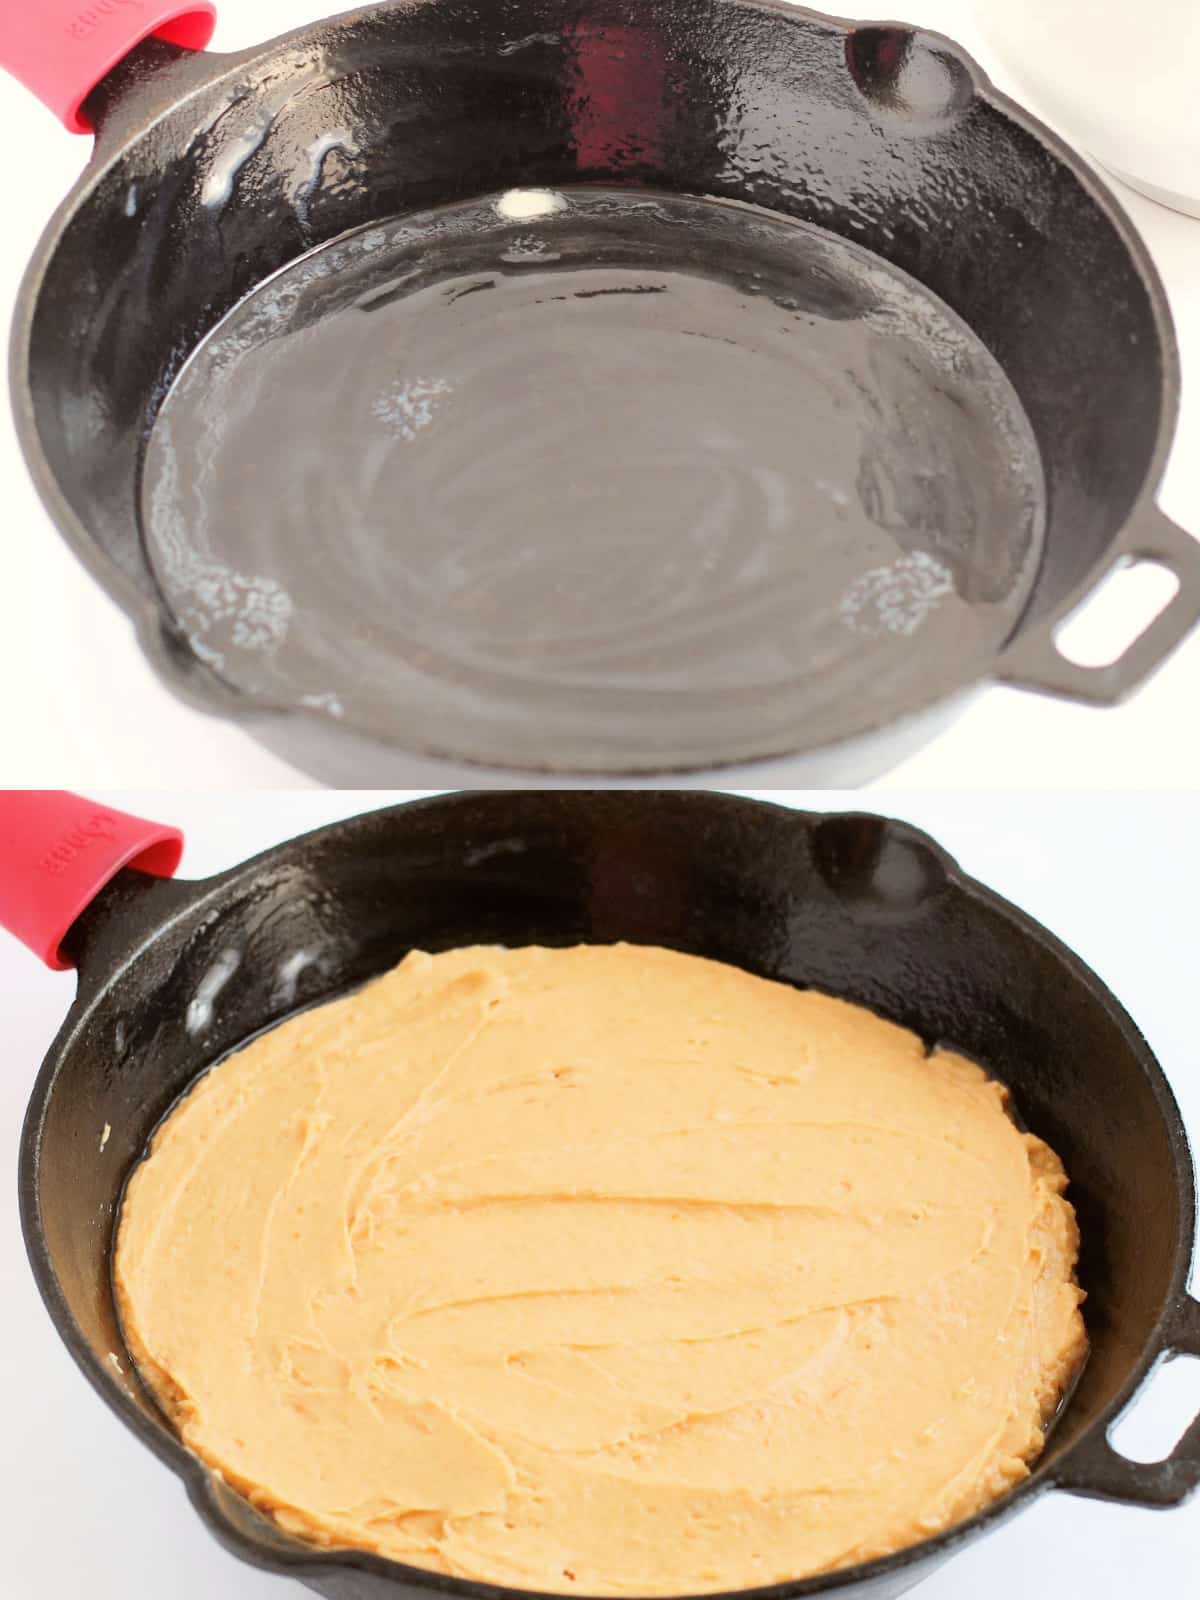 grease skillet and add batter